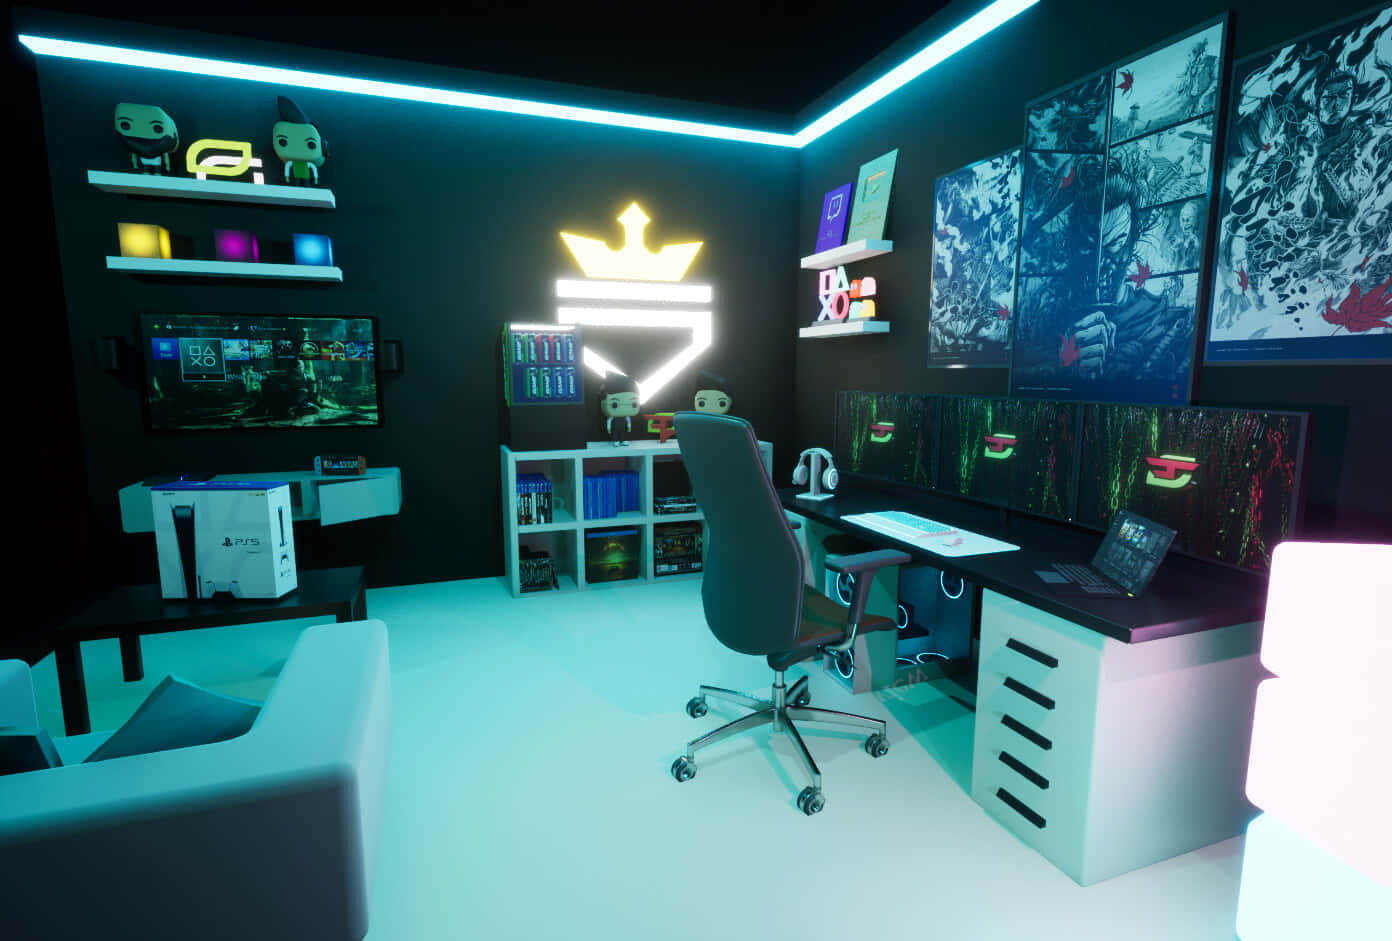 Transcend the Thrill of Gaming in this State-of-the-Art Room